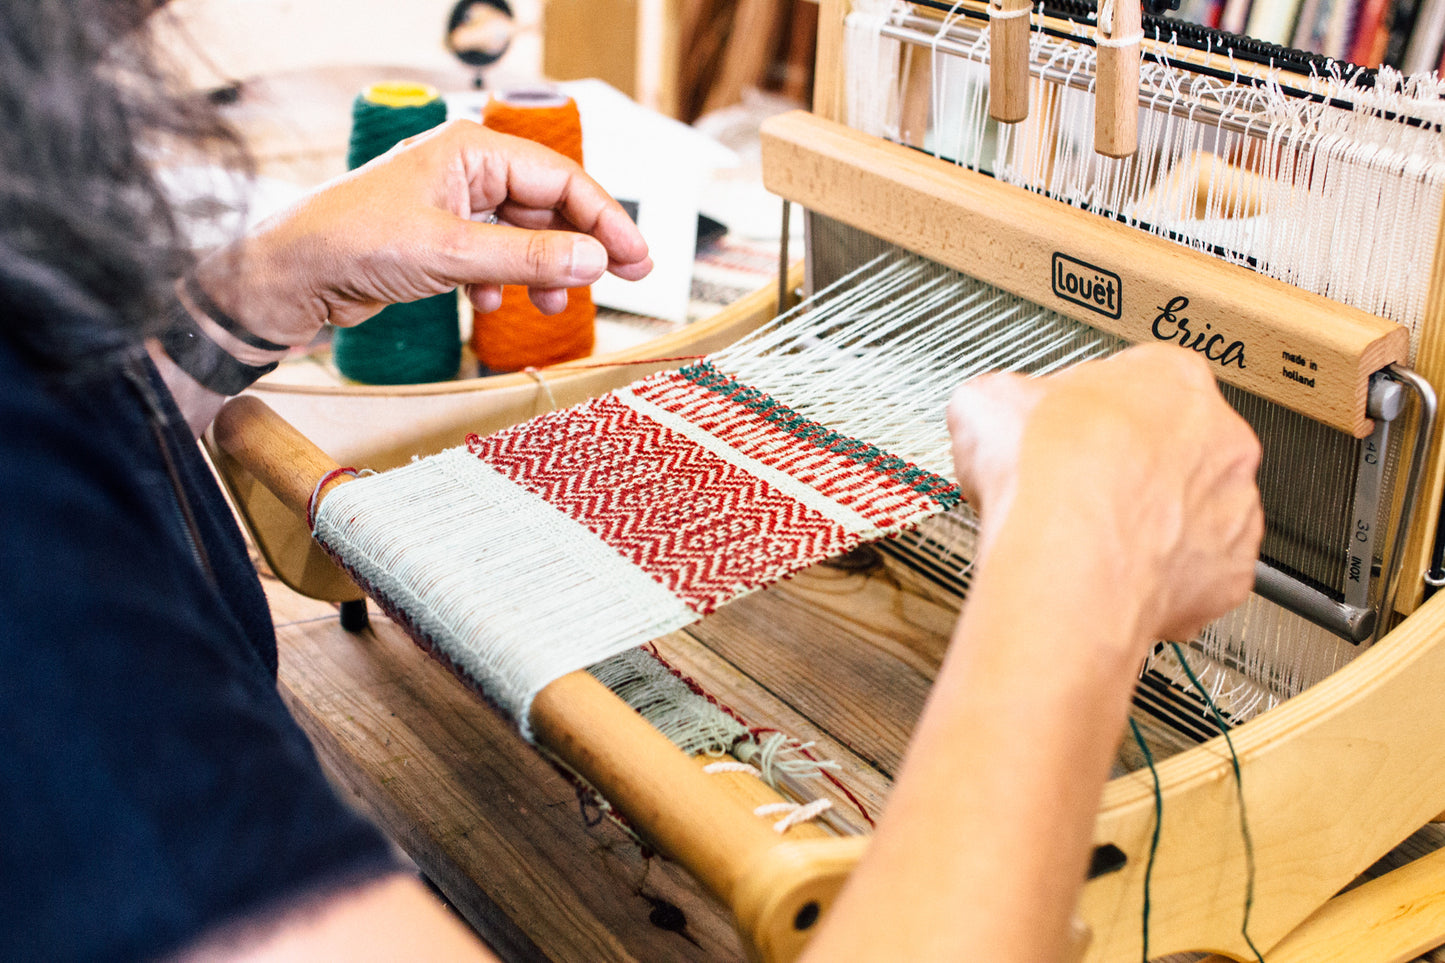 26 and 27 March 2022 - Tapestry vs Shaft loom weaving workshop - PRESENTIAL